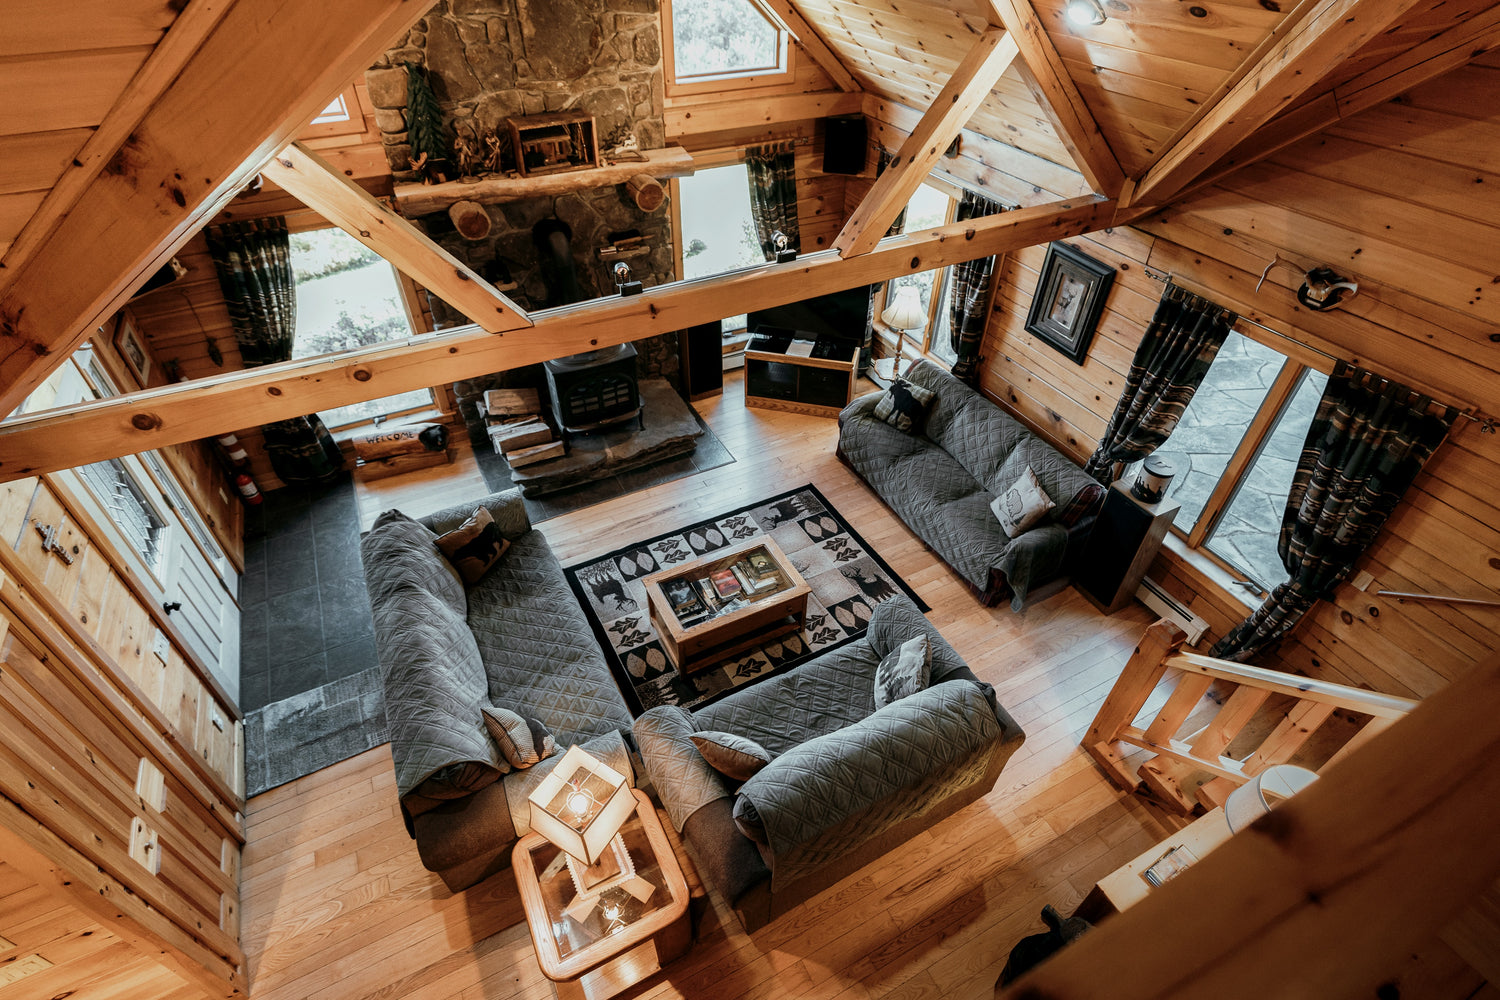 A cozy living room in a wooden cabin viewed from an elevated perspective. The room features a stone fireplace, two gray sofas, a patterned rug, a wooden coffee table, and various decorative items. Large windows and exposed beams contribute to the rustic ambiance.